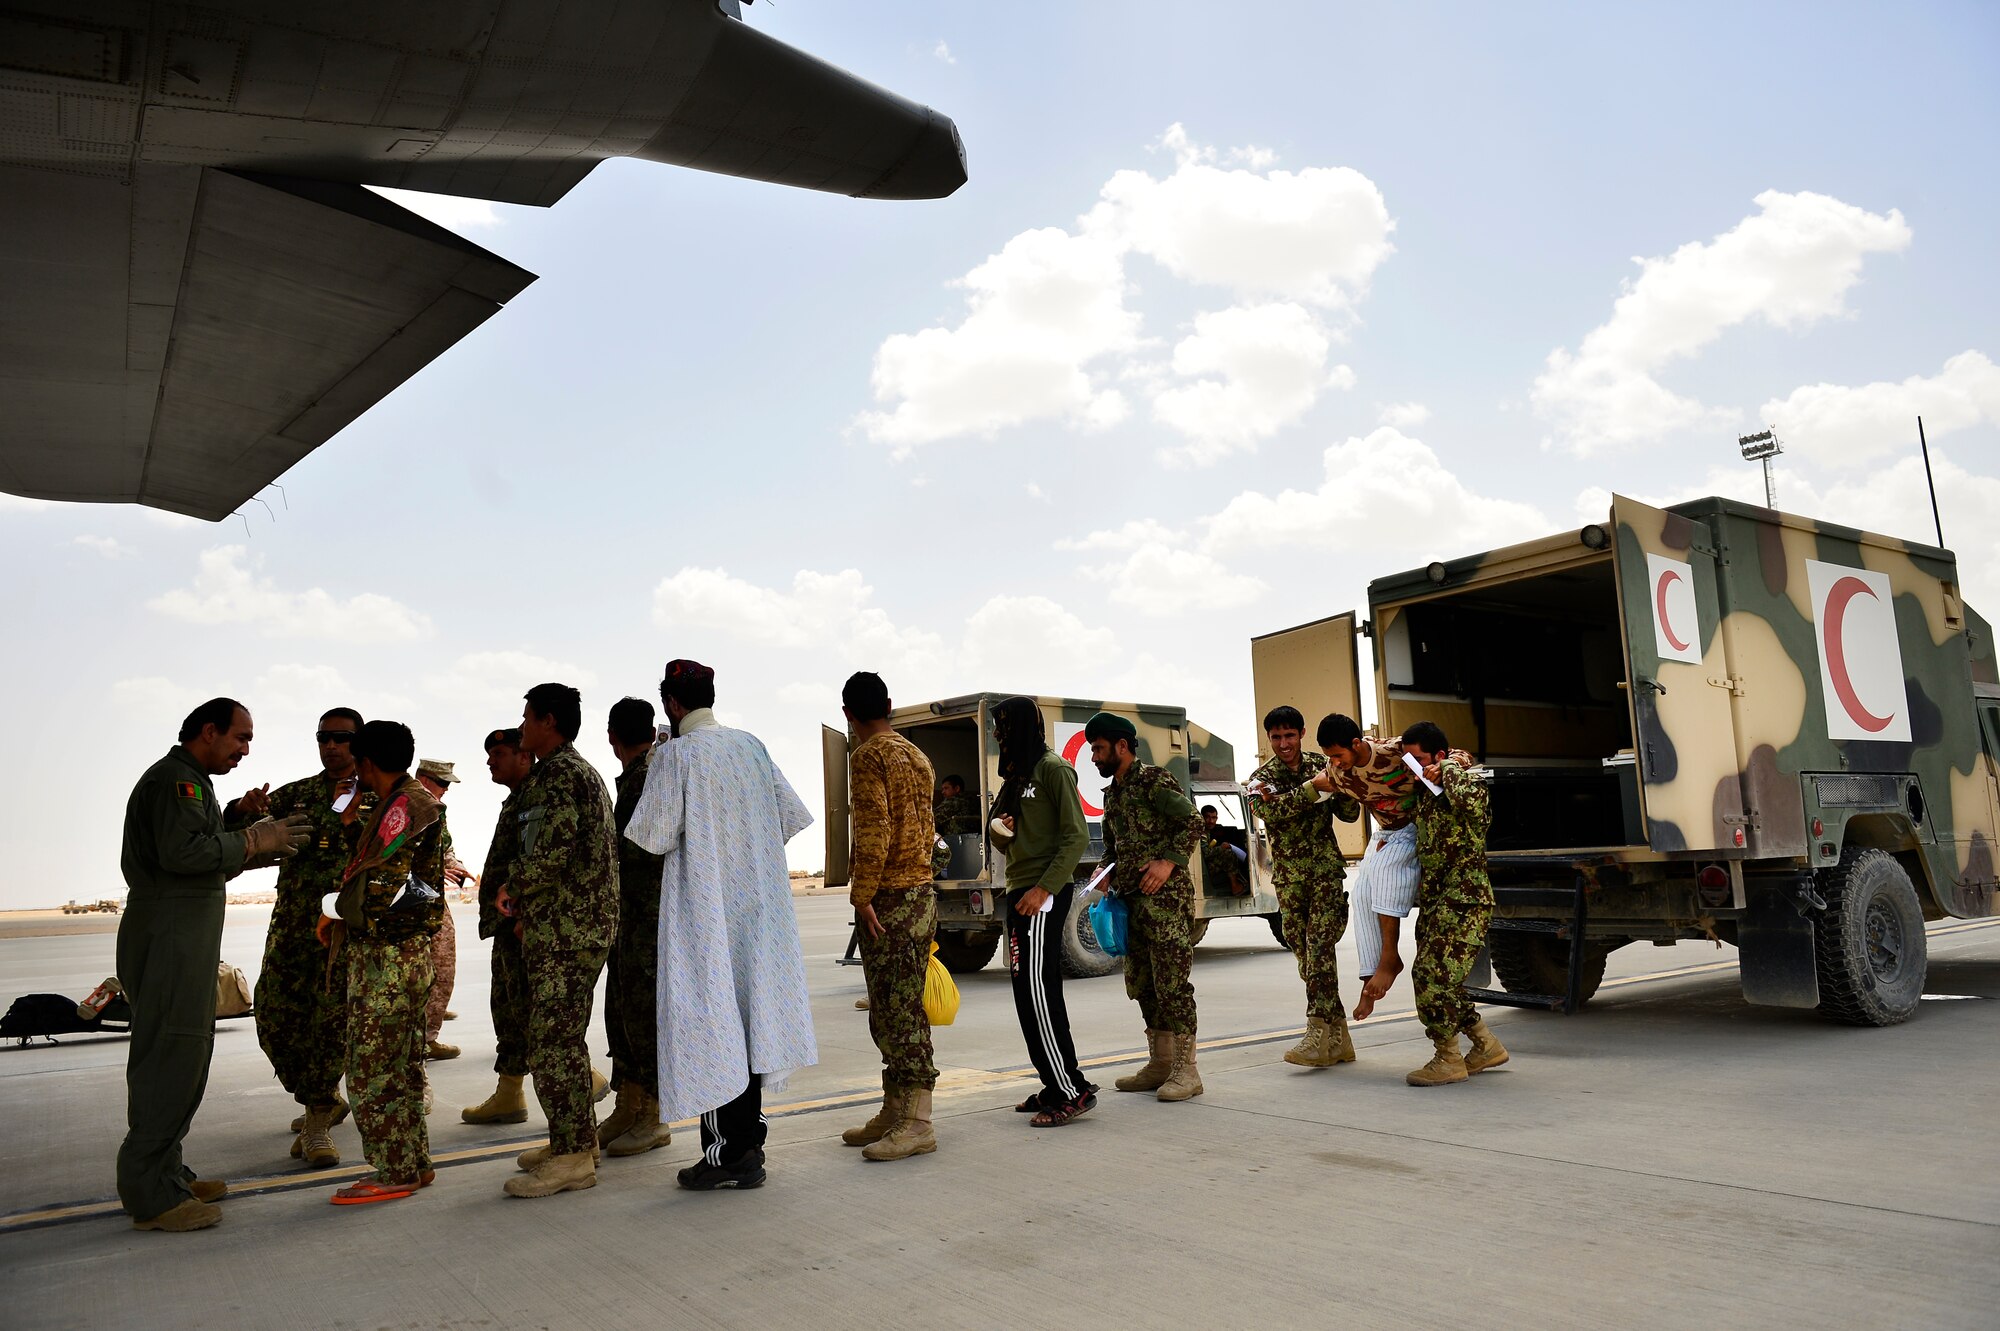 Sgt. Shanawaz Nabi Zada, an Afghan air force loadmaster, briefs Afghan national army soldiers prior to loading them on a C-130H1 Hercules May 19, 2014, on Camp Bastion, Afghanistan. As a loadmaster, Nabi Zada is responsible for briefing Afghan passengers on safety, enforcing in-flight standards and evenly distributing weight throughout the aircraft. Nabi Zada has been trained by advisors assigned to the 438th Air Expeditionary Advisory Squadron. (U.S. Air Force photo/ Staff Sgt. Vernon Young Jr.)